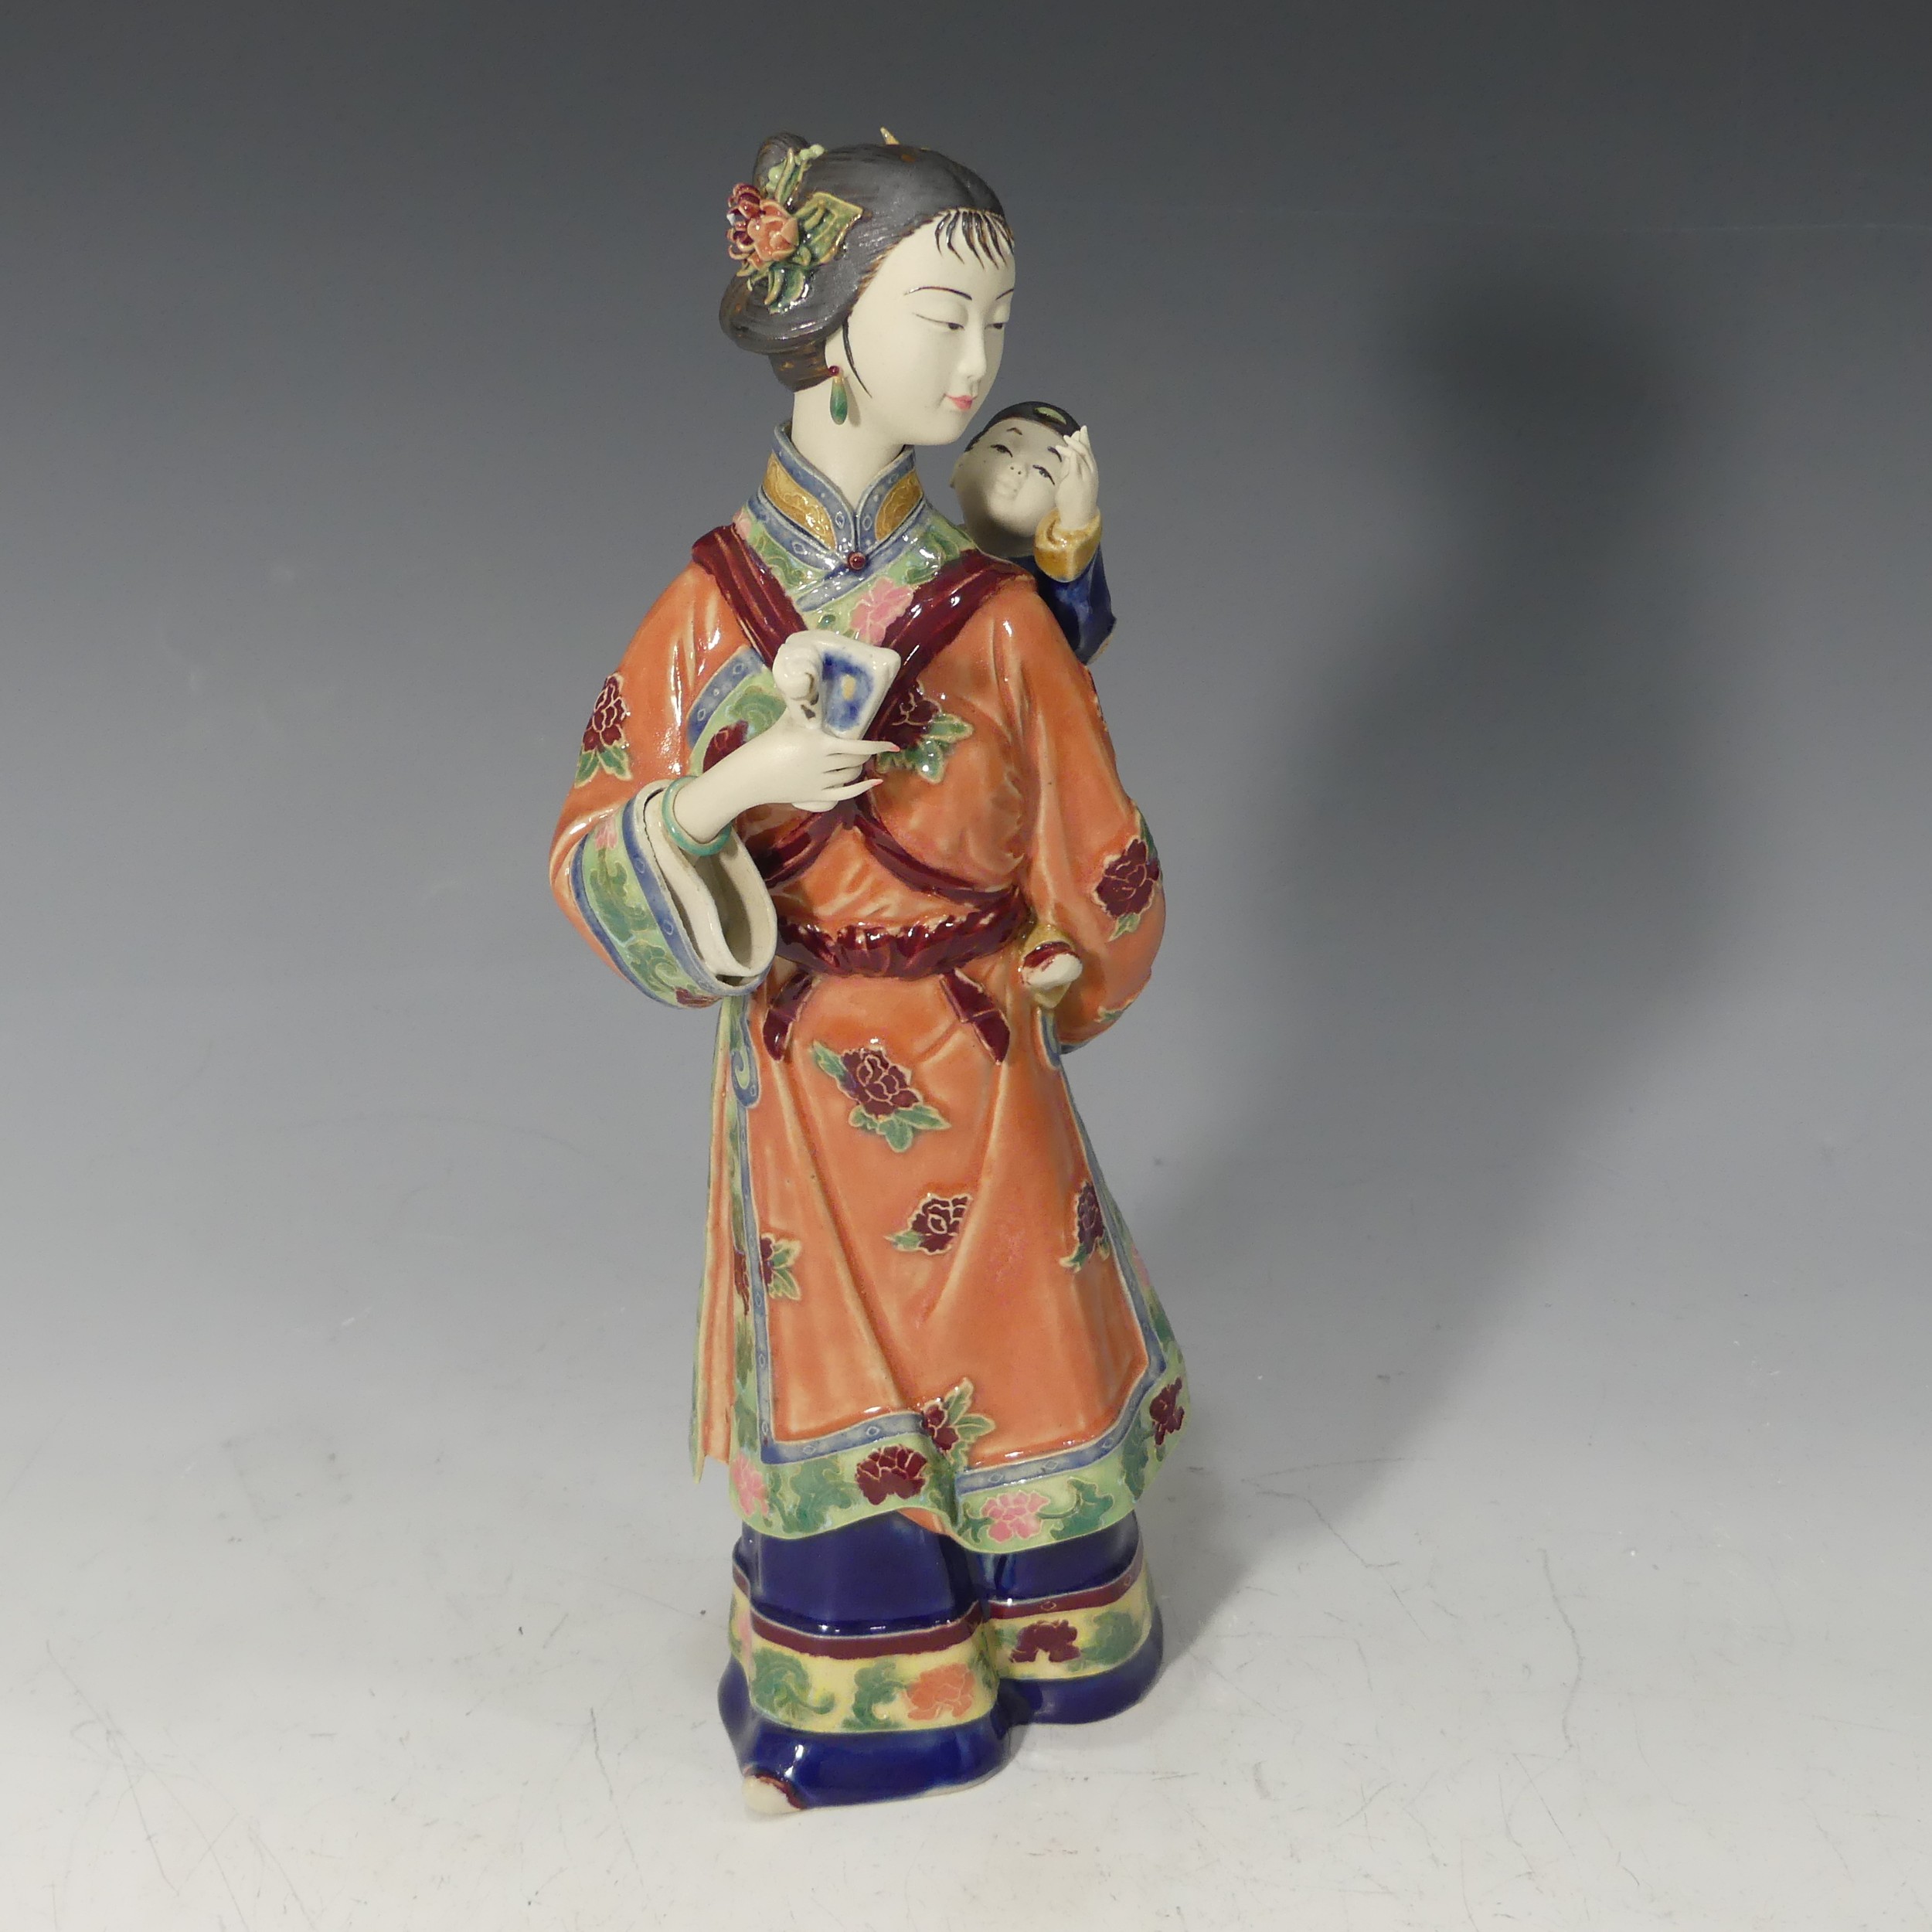 A 20thC Chinese porcelain Figure of a mother and child, decorated in rich enamels, with character - Image 4 of 7